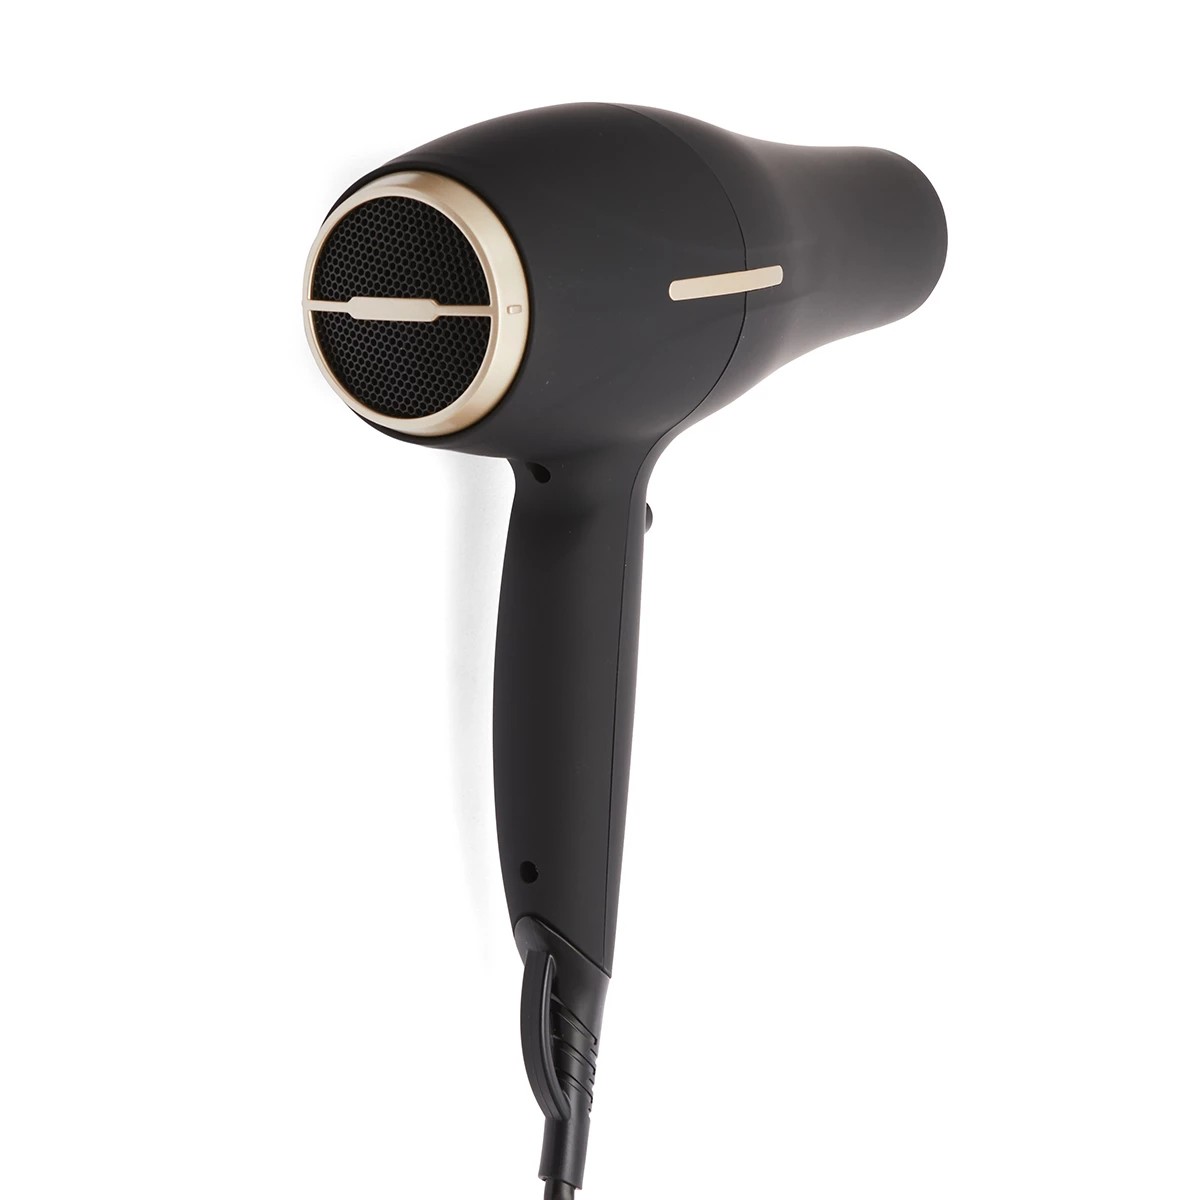 anko travel hair dryer review